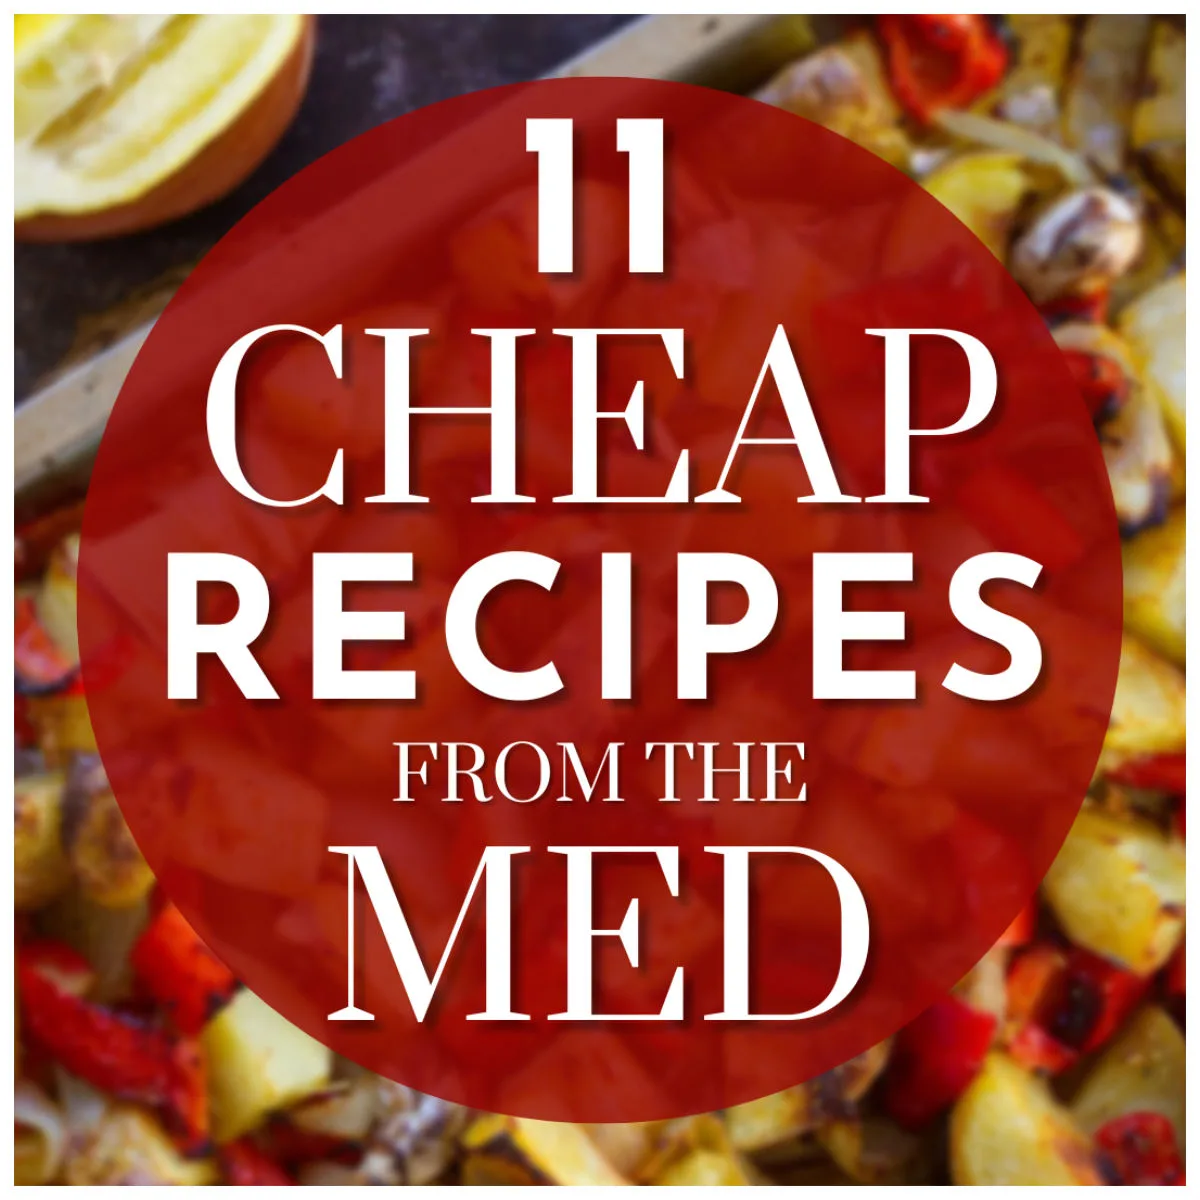 11 cheap recipes from the Med cover image